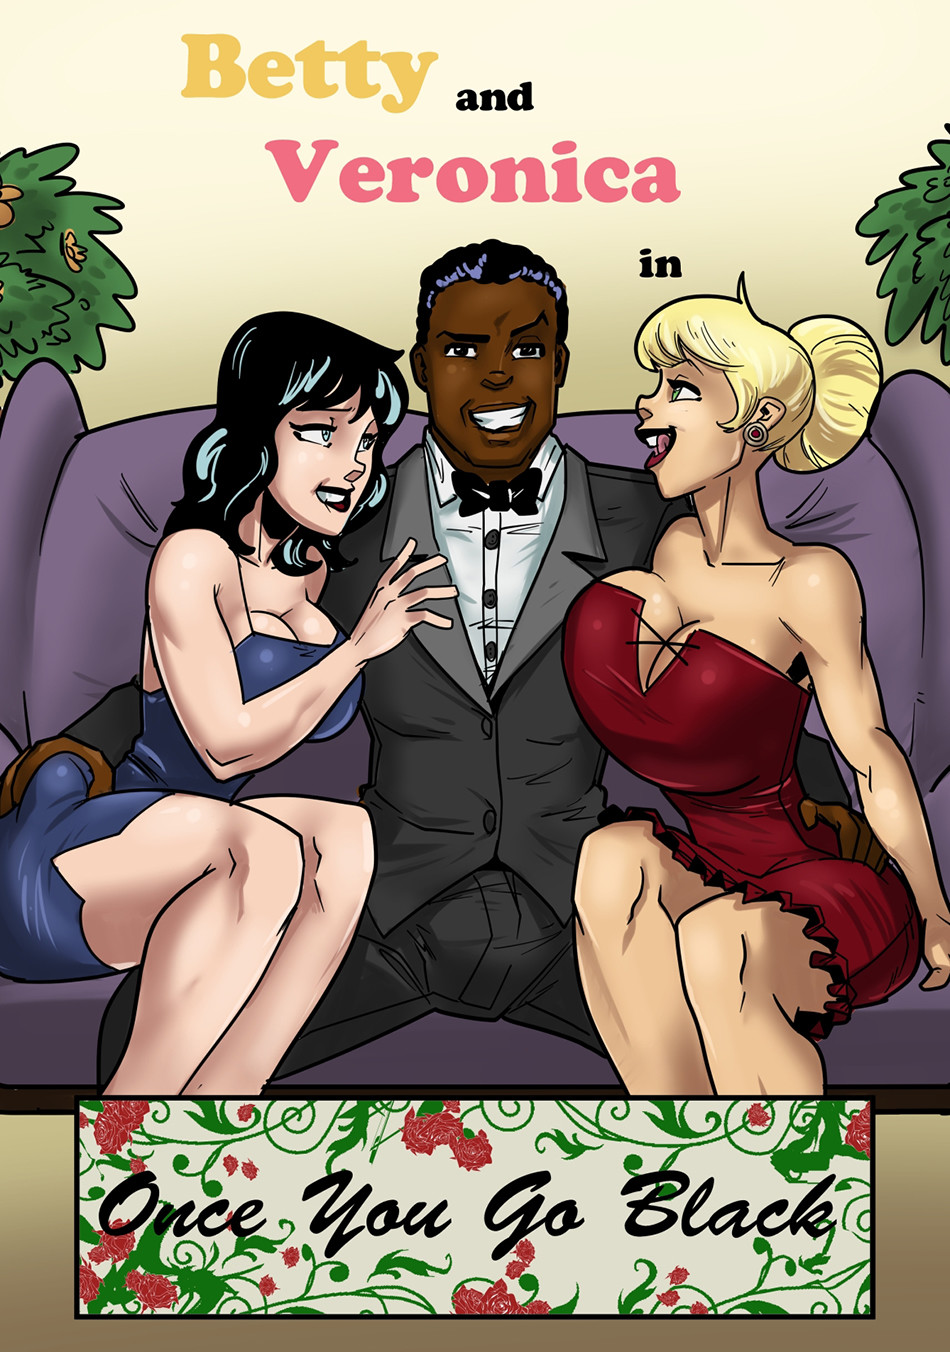 John Persons Black Anal - XXX - Betty and Veronica love BBC- John Persons Porn Comic - HD Porn Comics